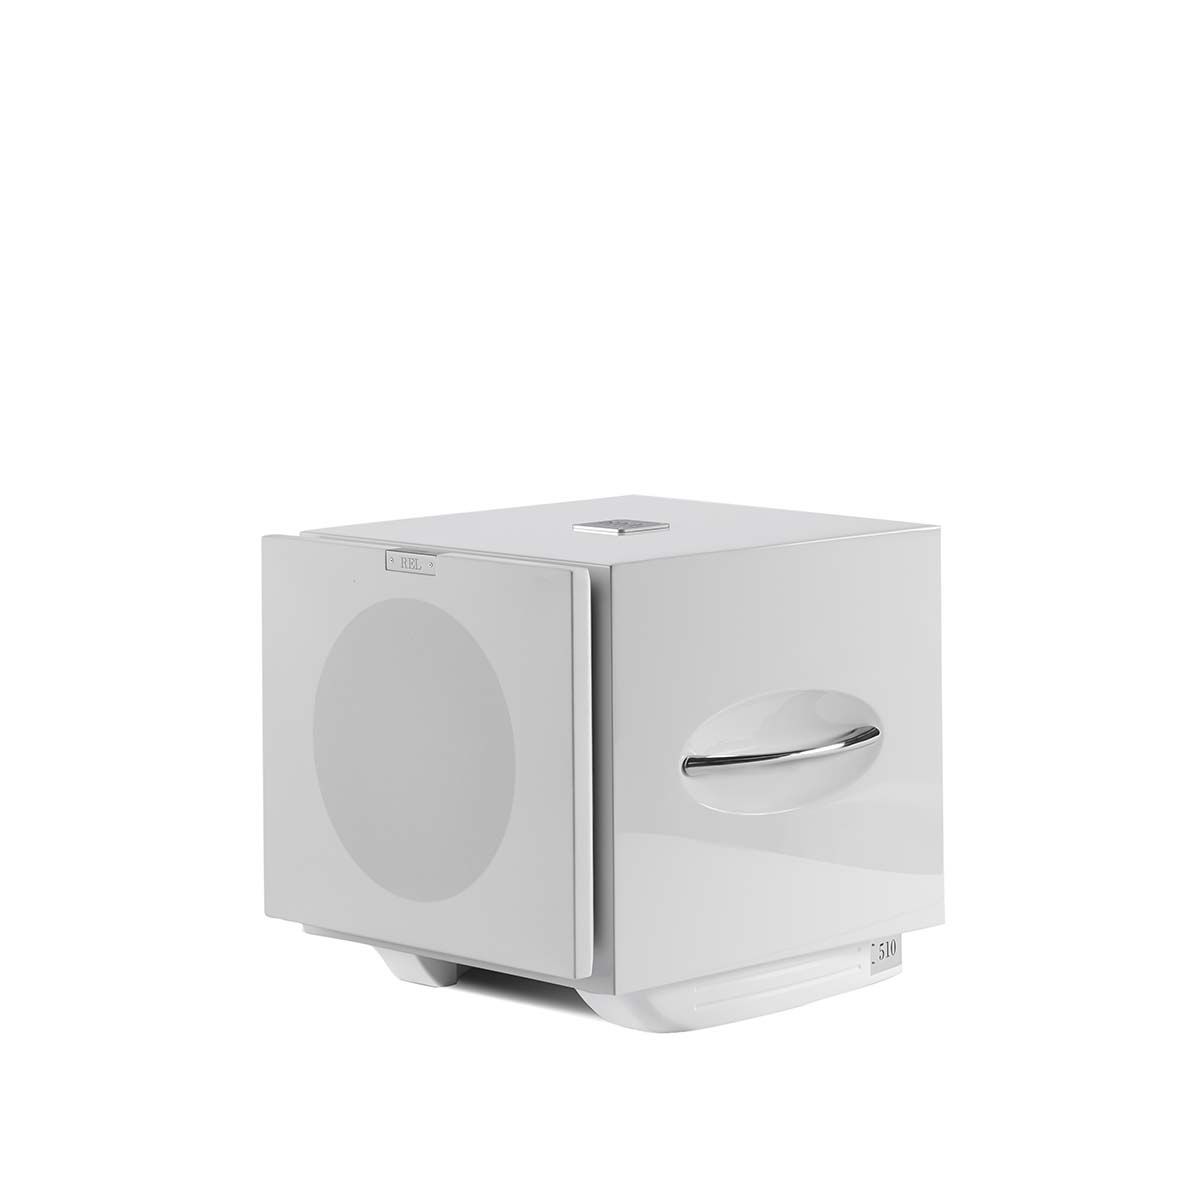 REL Acoustics S/510 Subwoofer, White, front angle with grille